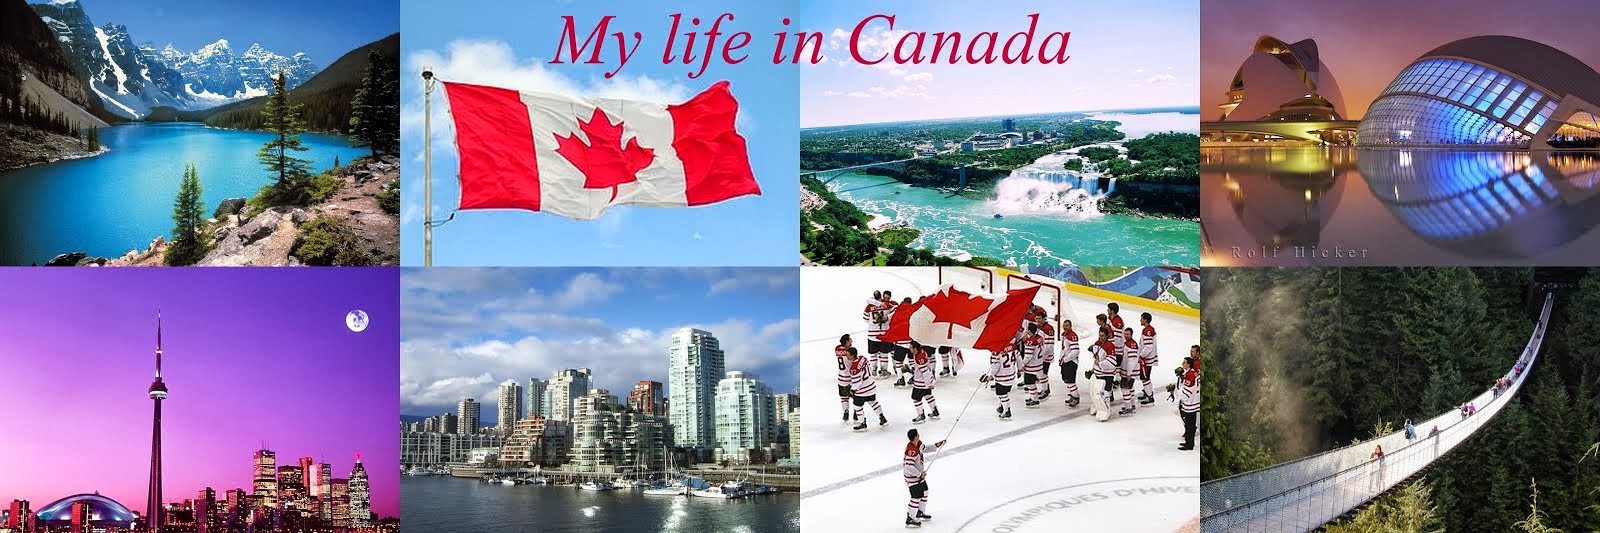 My life in Canada